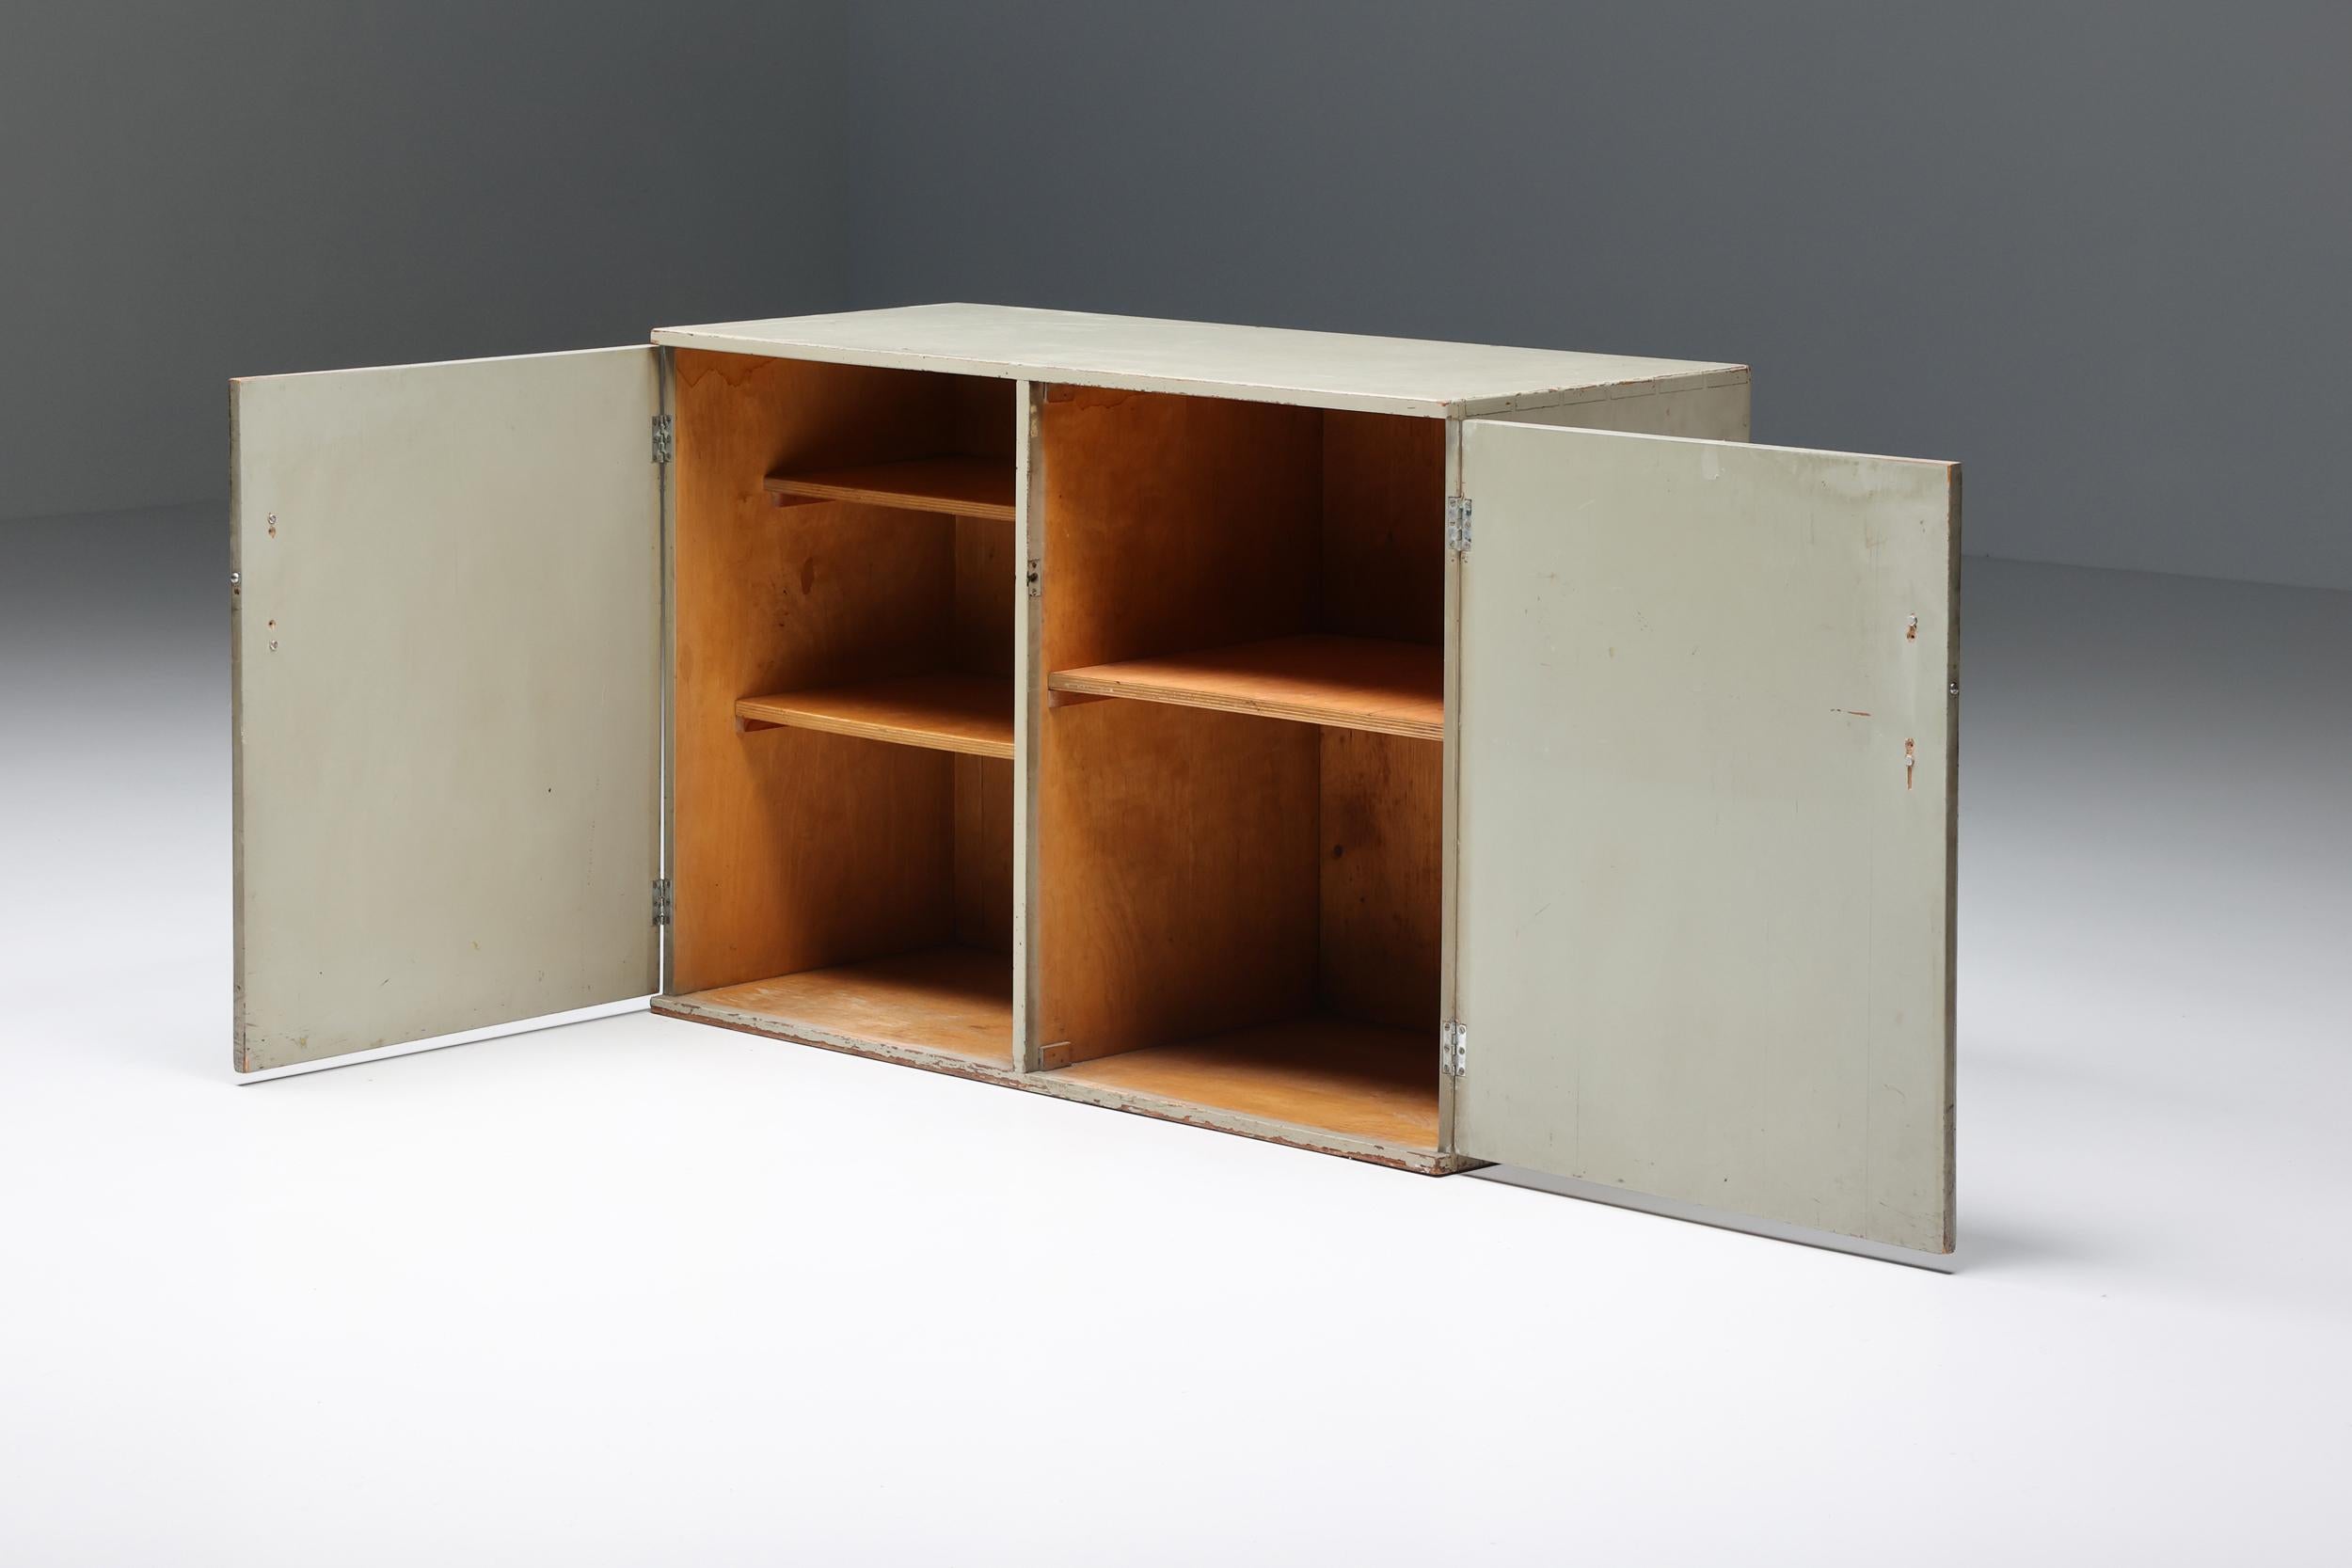 Gerald summers; sideboard; Mid-Century Modern; wood; storage furniture; British design; plywood; 

Mid-Century Modern sideboard with three wooden shelves designed by Gerald Summers. The British furniture designer came to prominence with his design